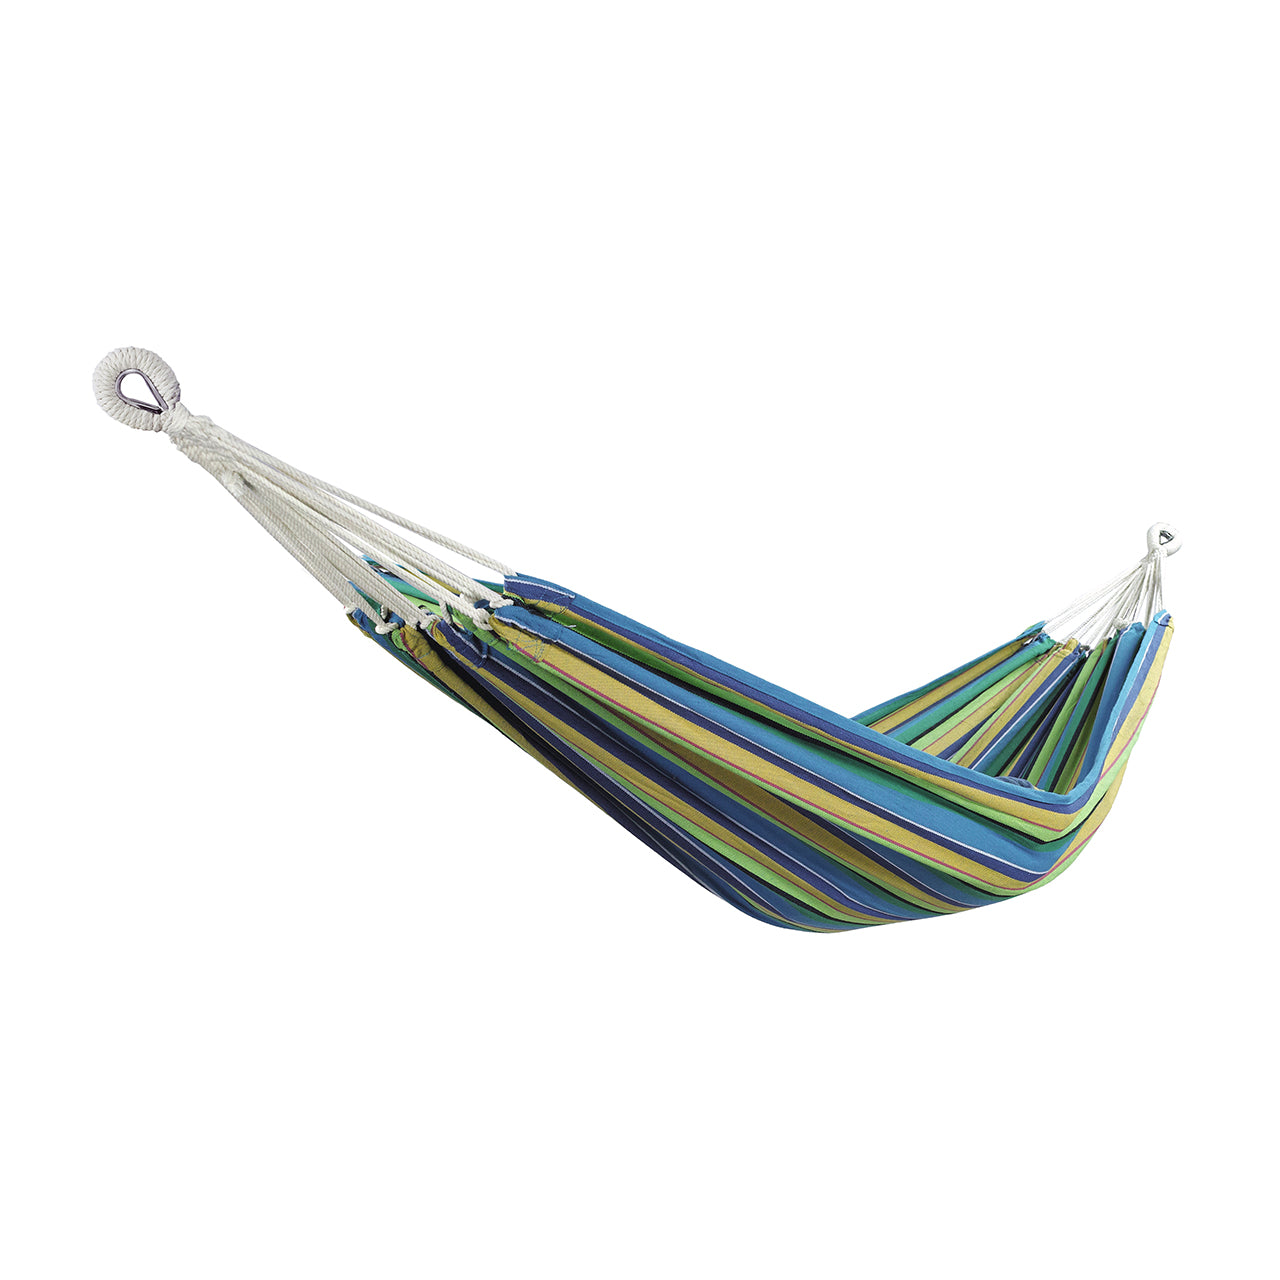 Bliss Hammocks 40-inch Wide Hammock in a Bag with Hand-woven Rope loops in the rainforest stripe variation.